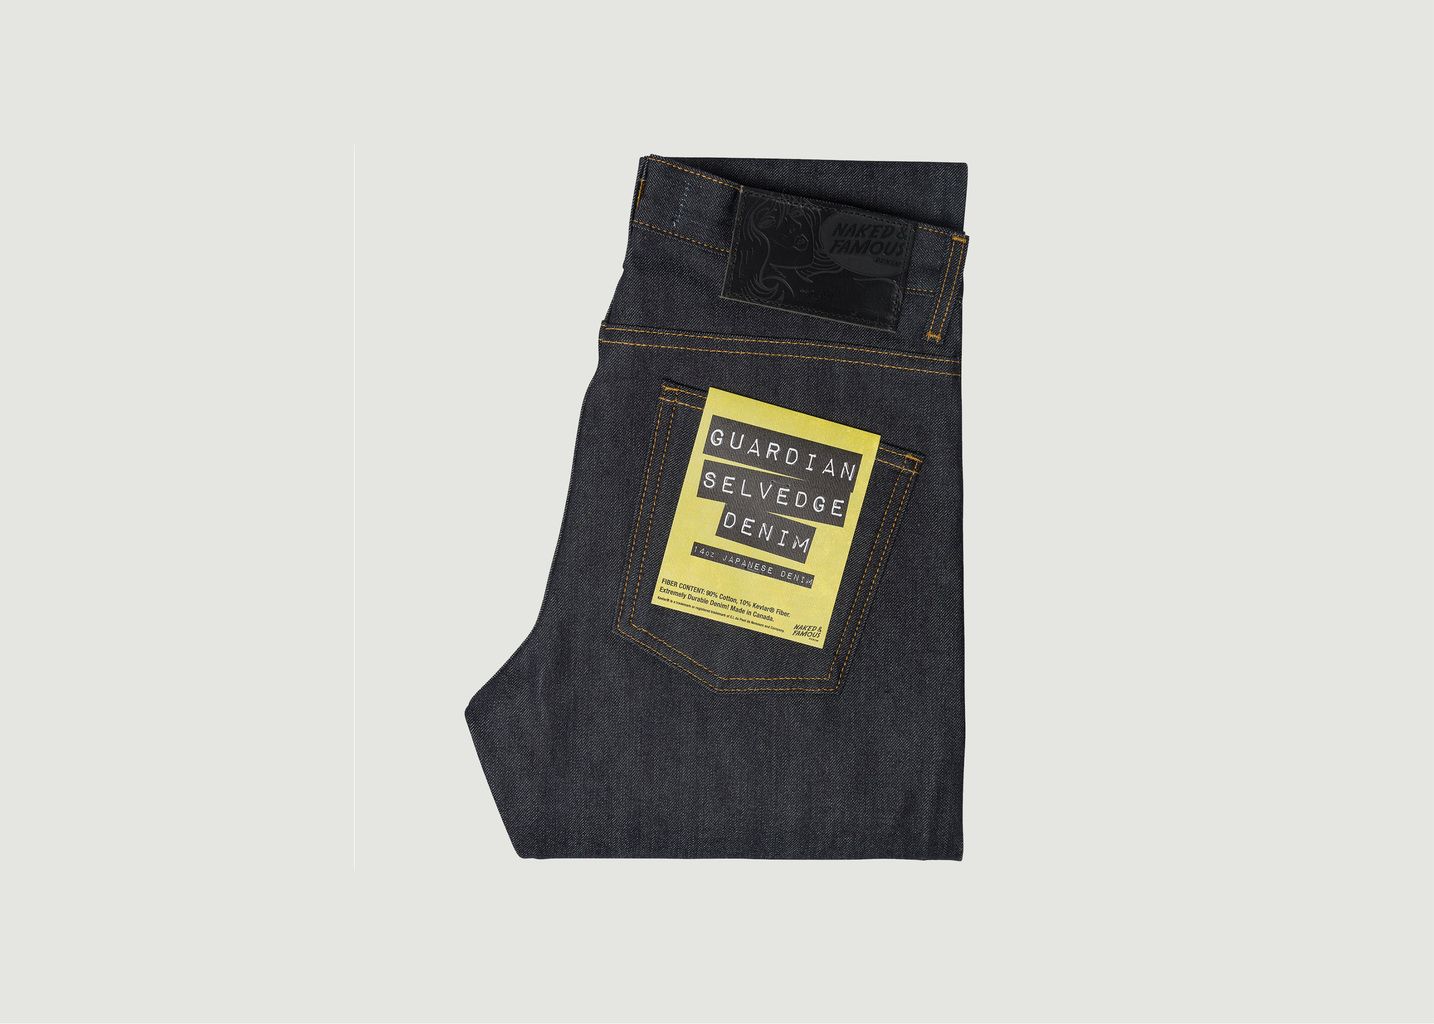 Naked & Famous Super Guy Guardian Selvedge Jeans